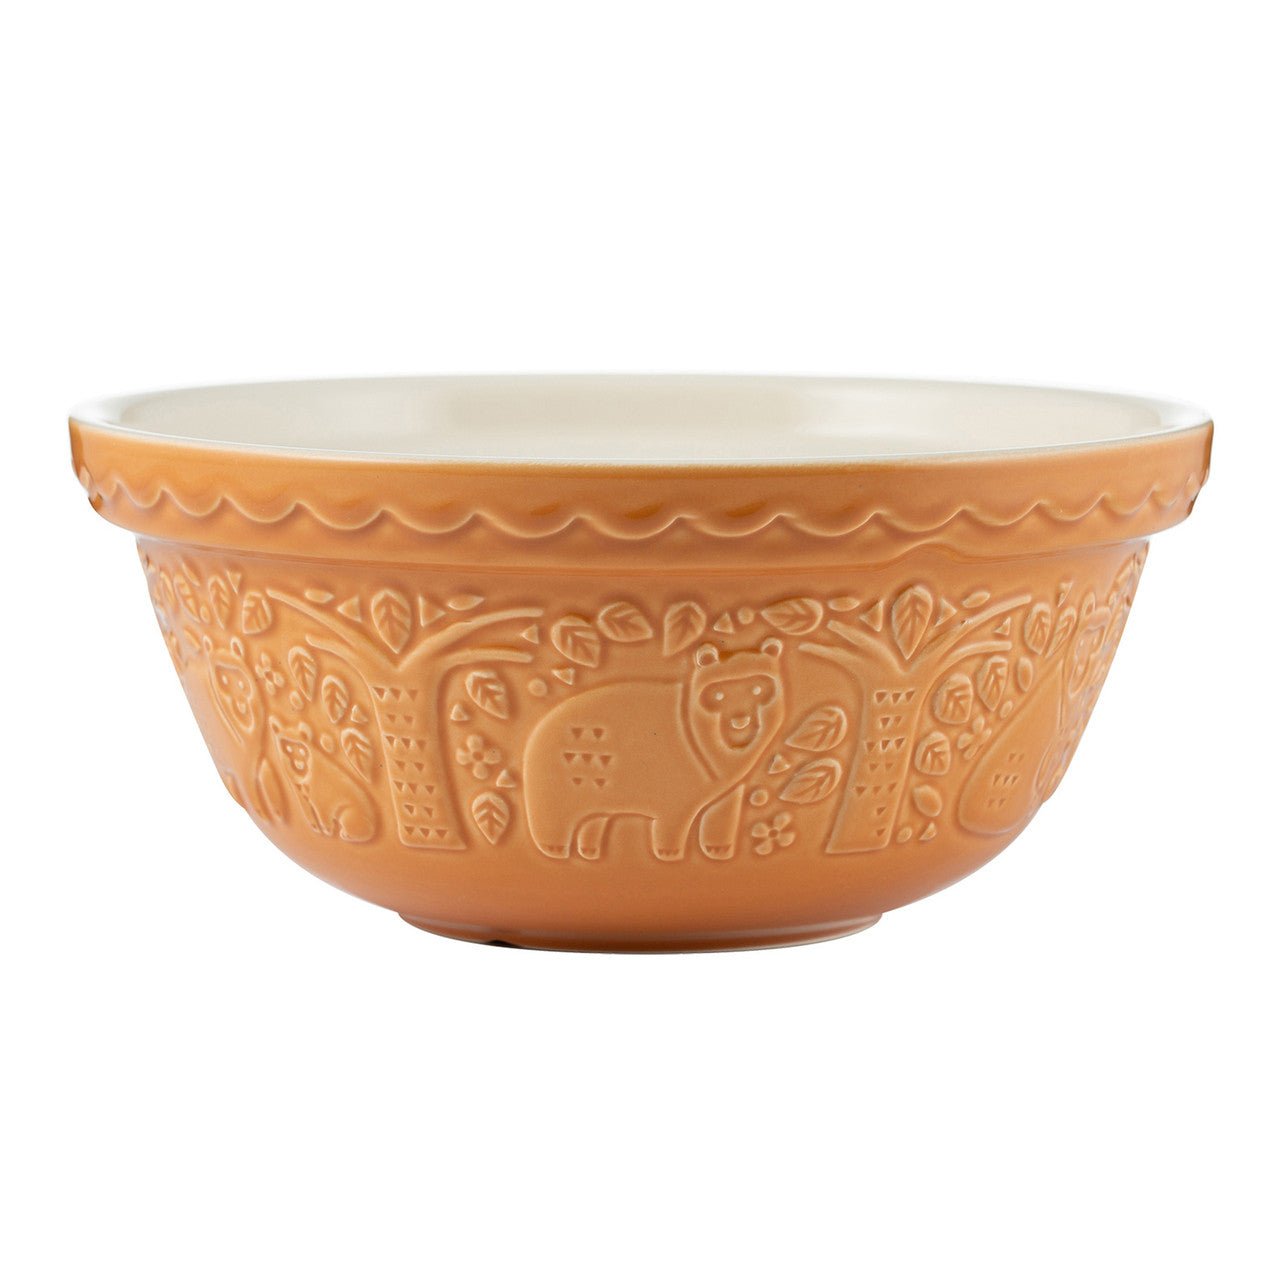 Otto's Corner Store - Mason Cash - In The Forest Bear Ochre Mixing Bowl - 24cm